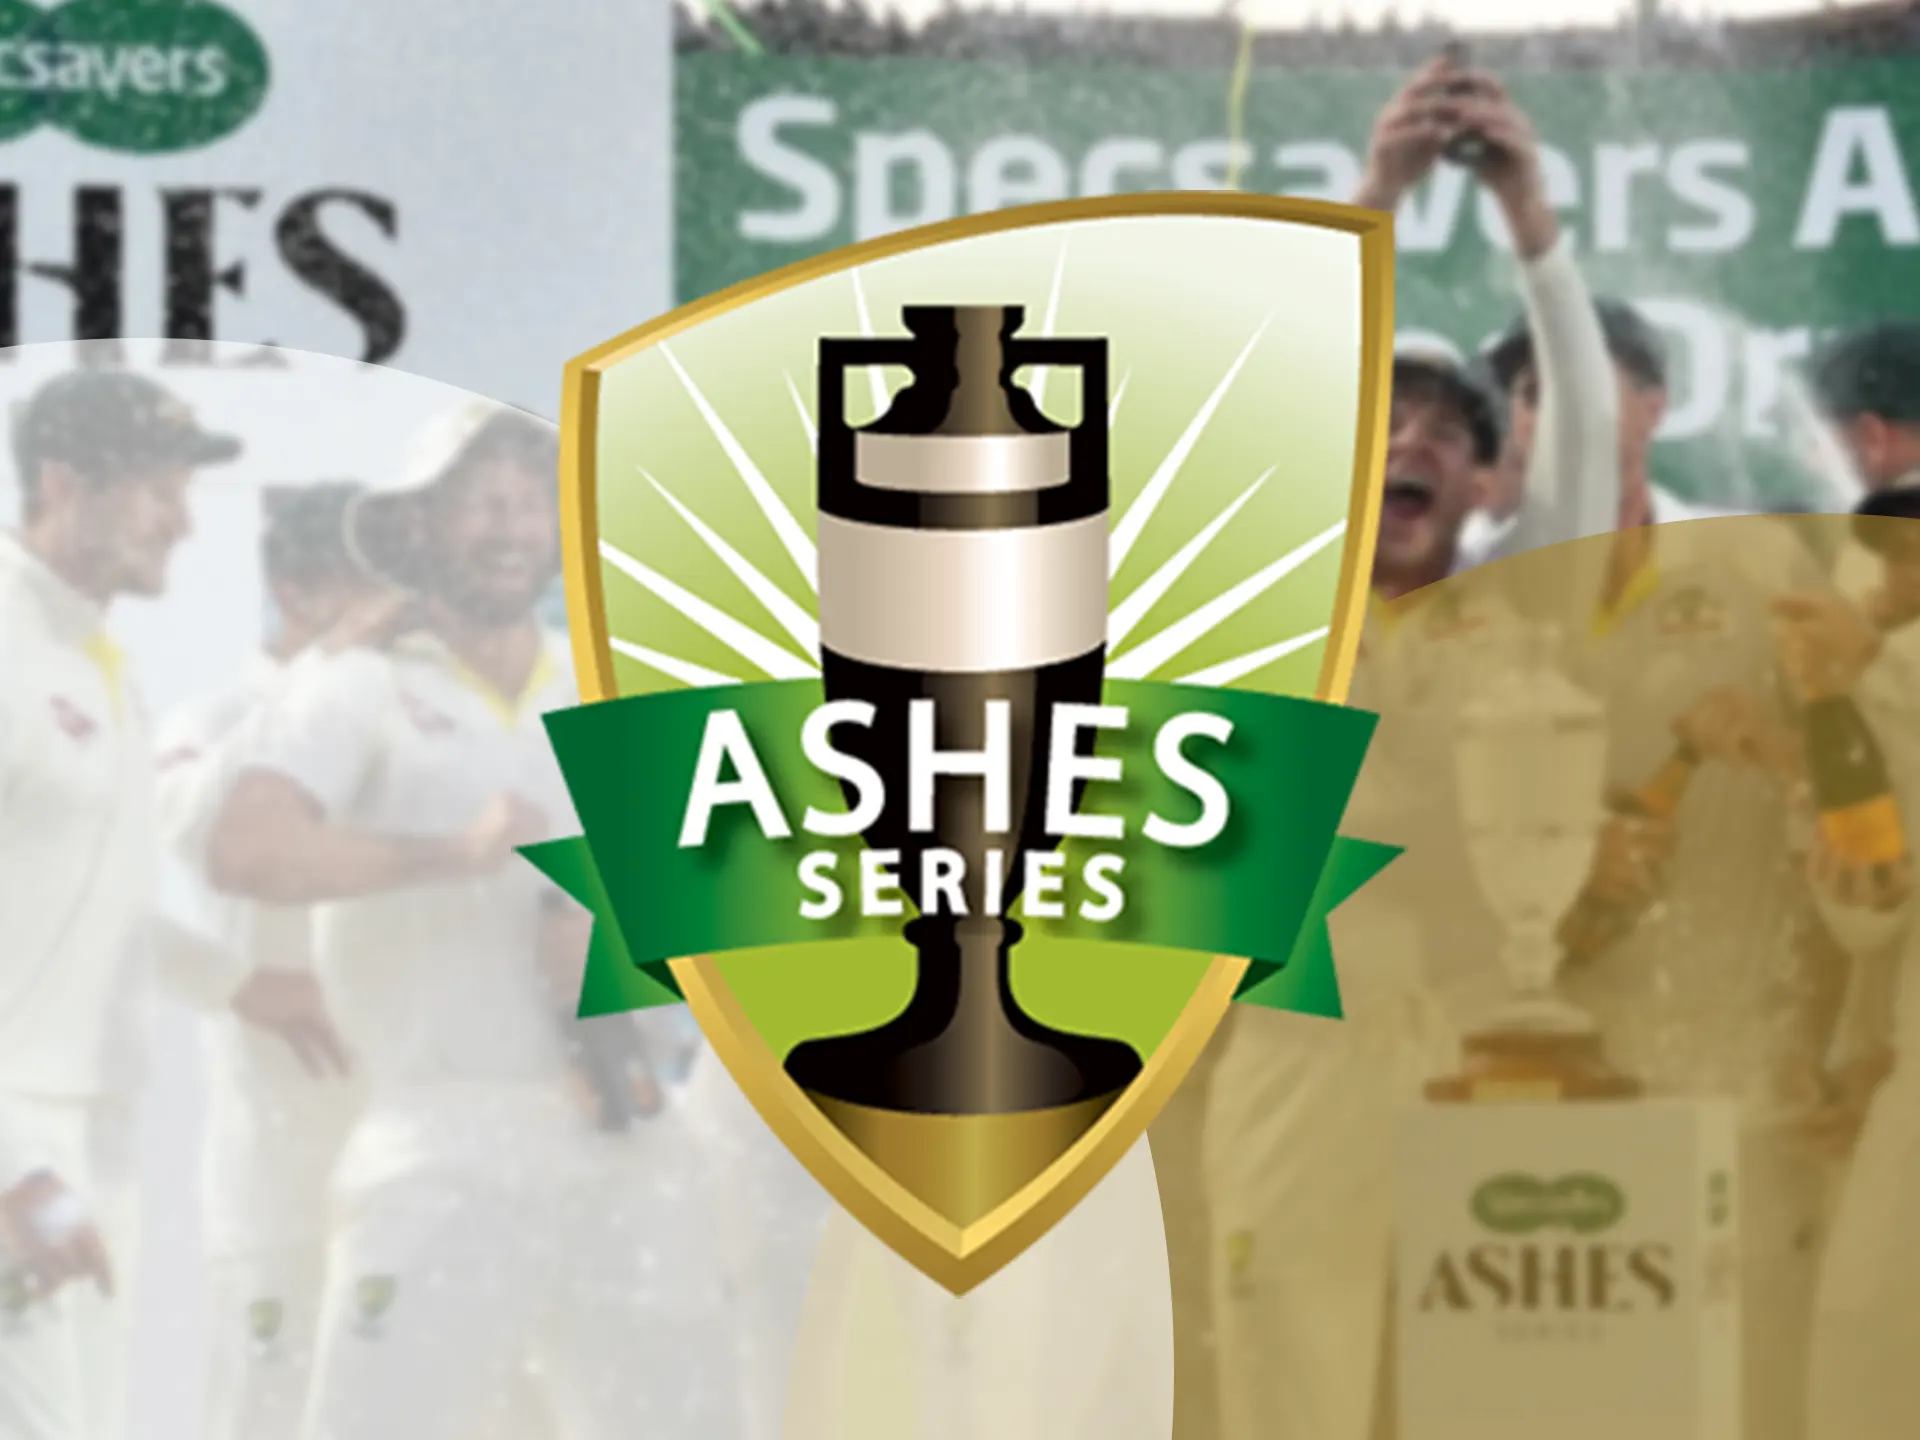 Ashes series league is a great event to watch and bet on.